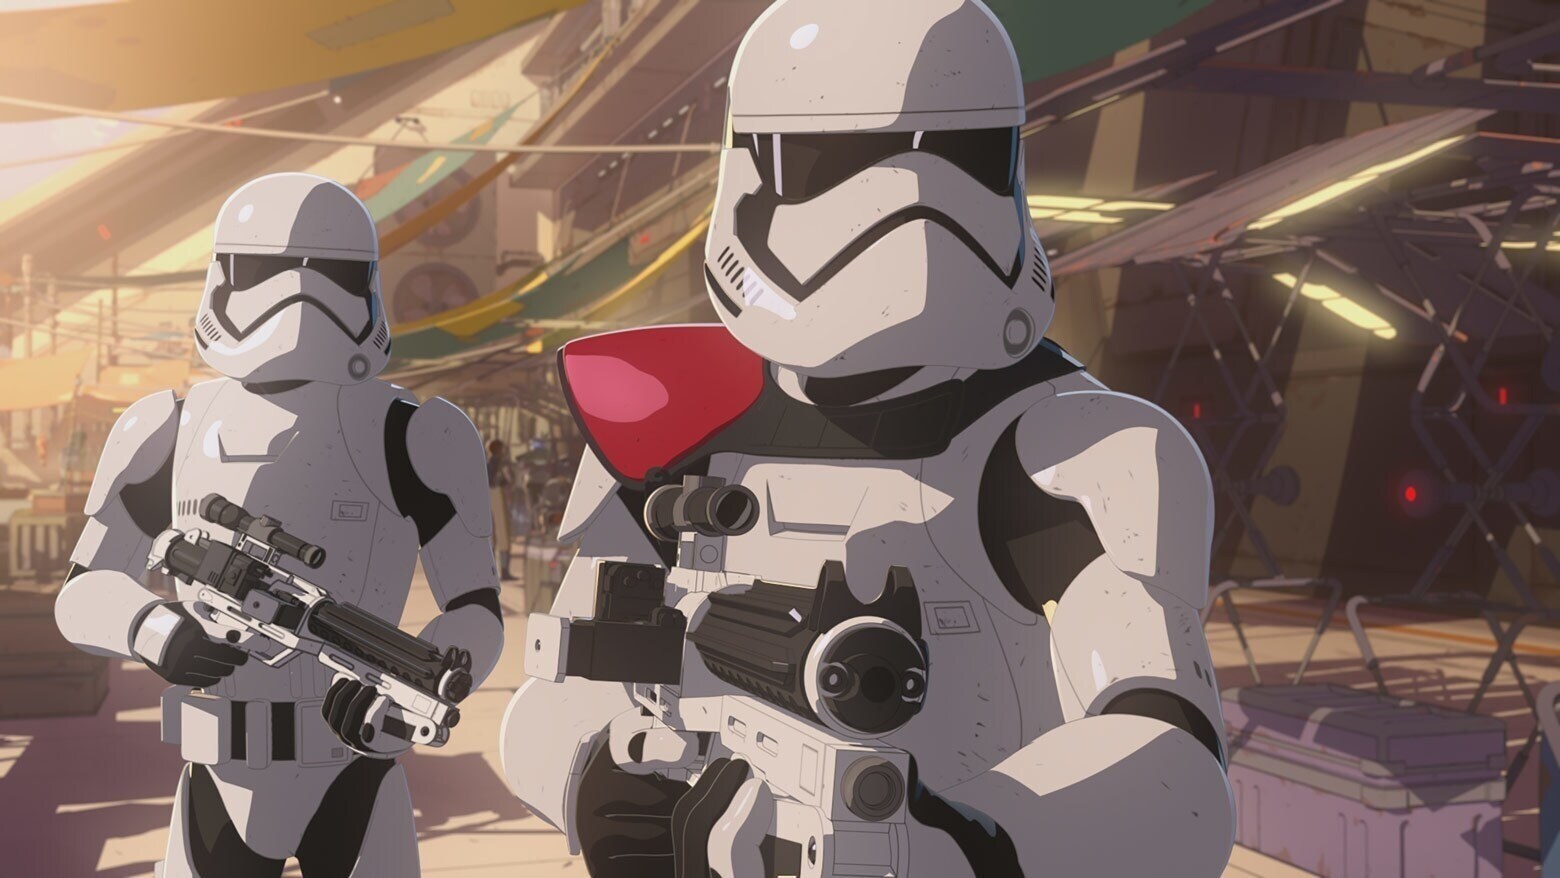 Two Stormtroopers holding guns